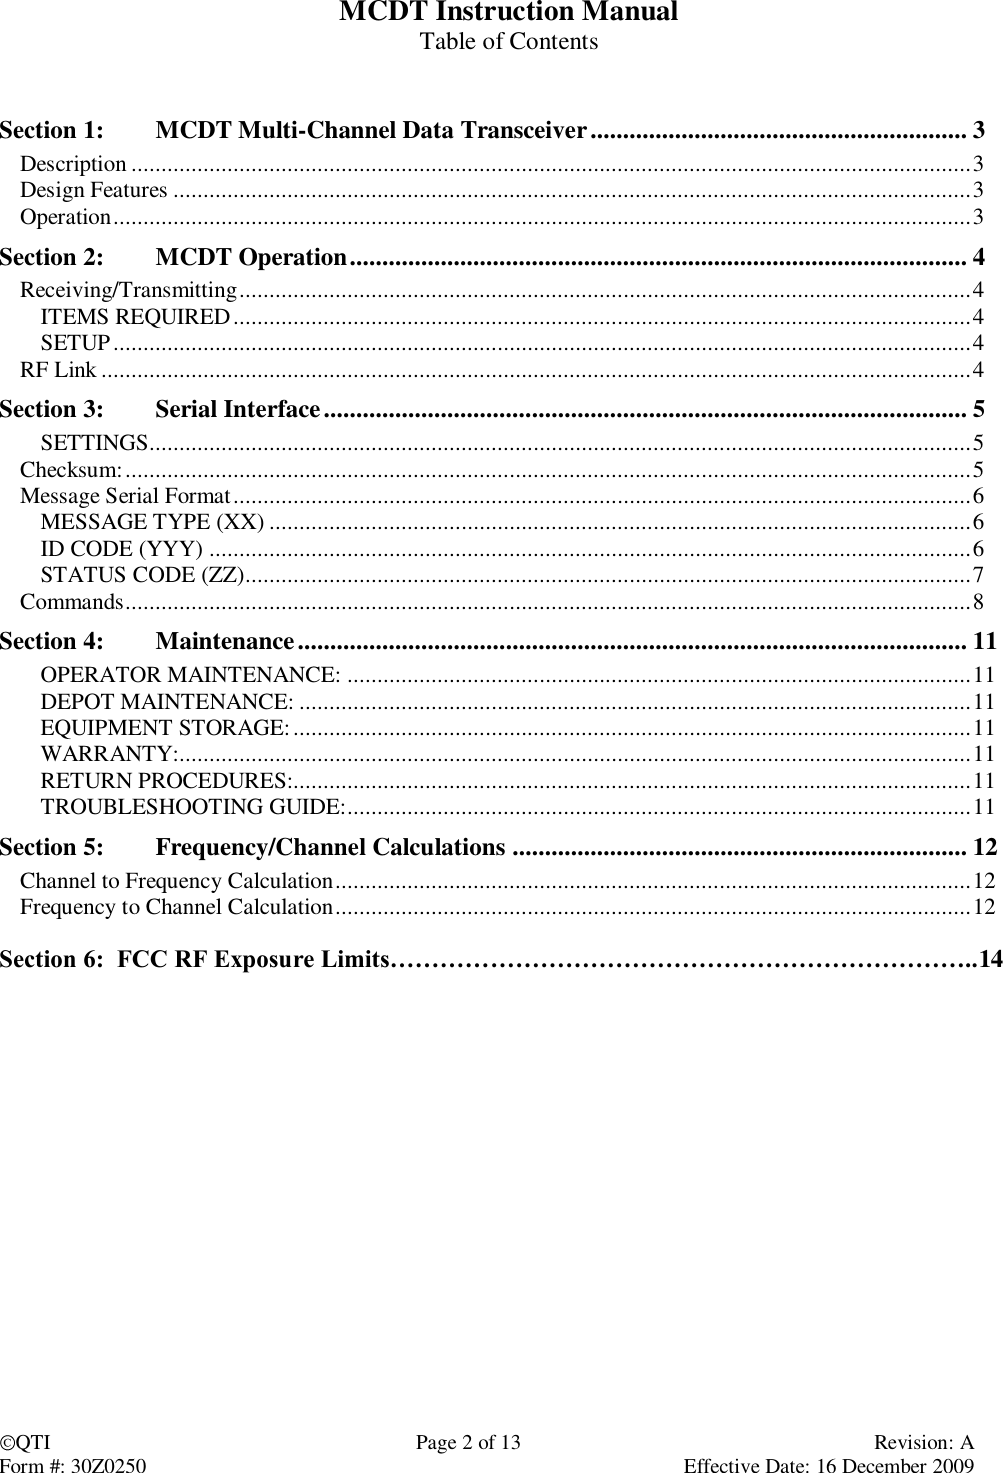 QTI  Page 2 of 13  Revision: A Form #: 30Z0250    Effective Date: 16 December 2009 MCDT Instruction Manual Table of Contents   Section 1:  MCDT Multi-Channel Data Transceiver .......................................................... 3 Description ............................................................................................................................................ 3 Design Features ..................................................................................................................................... 3 Operation ............................................................................................................................................... 3 Section 2:  MCDT Operation ............................................................................................... 4 Receiving/Transmitting .......................................................................................................................... 4 ITEMS REQUIRED ........................................................................................................................... 4 SETUP ............................................................................................................................................... 4 RF Link ................................................................................................................................................. 4 Section 3:  Serial Interface ................................................................................................... 5 SETTINGS ......................................................................................................................................... 5 Checksum: ............................................................................................................................................. 5 Message Serial Format ........................................................................................................................... 6 MESSAGE TYPE (XX) ..................................................................................................................... 6 ID CODE (YYY) ............................................................................................................................... 6 STATUS CODE (ZZ) ......................................................................................................................... 7 Commands ............................................................................................................................................. 8 Section 4:  Maintenance ....................................................................................................... 11 OPERATOR MAINTENANCE: ........................................................................................................ 11 DEPOT MAINTENANCE: ................................................................................................................ 11 EQUIPMENT STORAGE: ................................................................................................................. 11 WARRANTY:.................................................................................................................................... 11 RETURN PROCEDURES:................................................................................................................. 11 TROUBLESHOOTING GUIDE: ........................................................................................................ 11 Section 5:  Frequency/Channel Calculations ...................................................................... 12 Channel to Frequency Calculation .......................................................................................................... 12 Frequency to Channel Calculation .......................................................................................................... 12  Section 6:  FCC RF Exposure Limits……………………………………………………………..14     